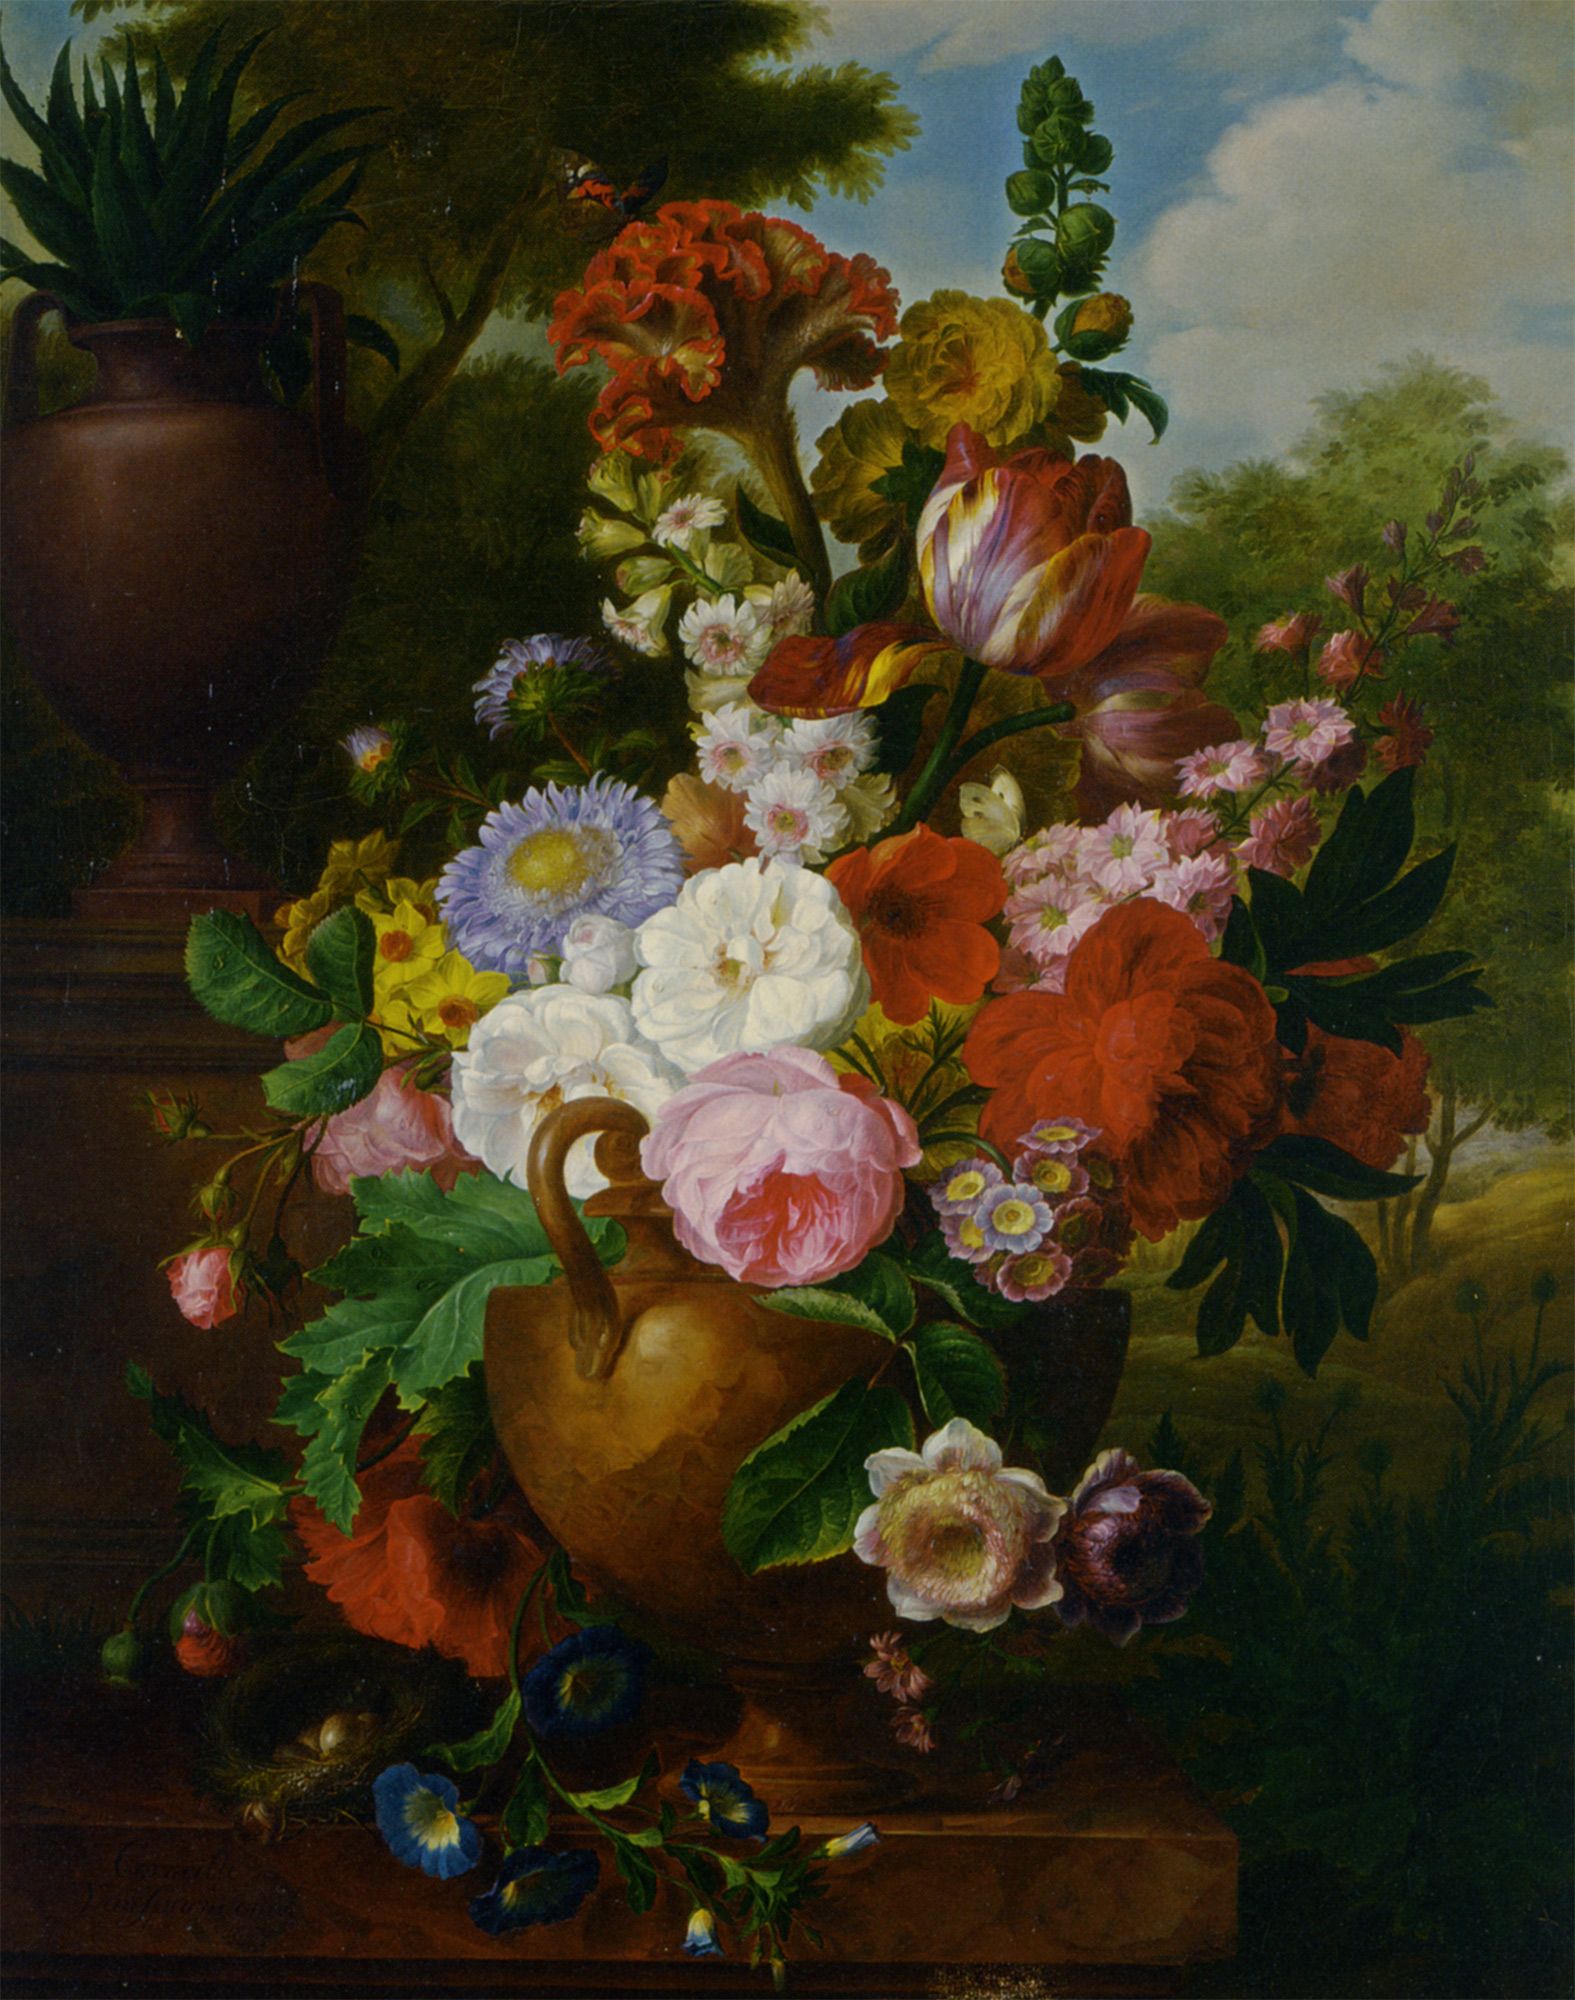 A Flower Still Life with Roses Tulips Peonies and other Flowers in a Vase by Cornelis Van Spaendonck